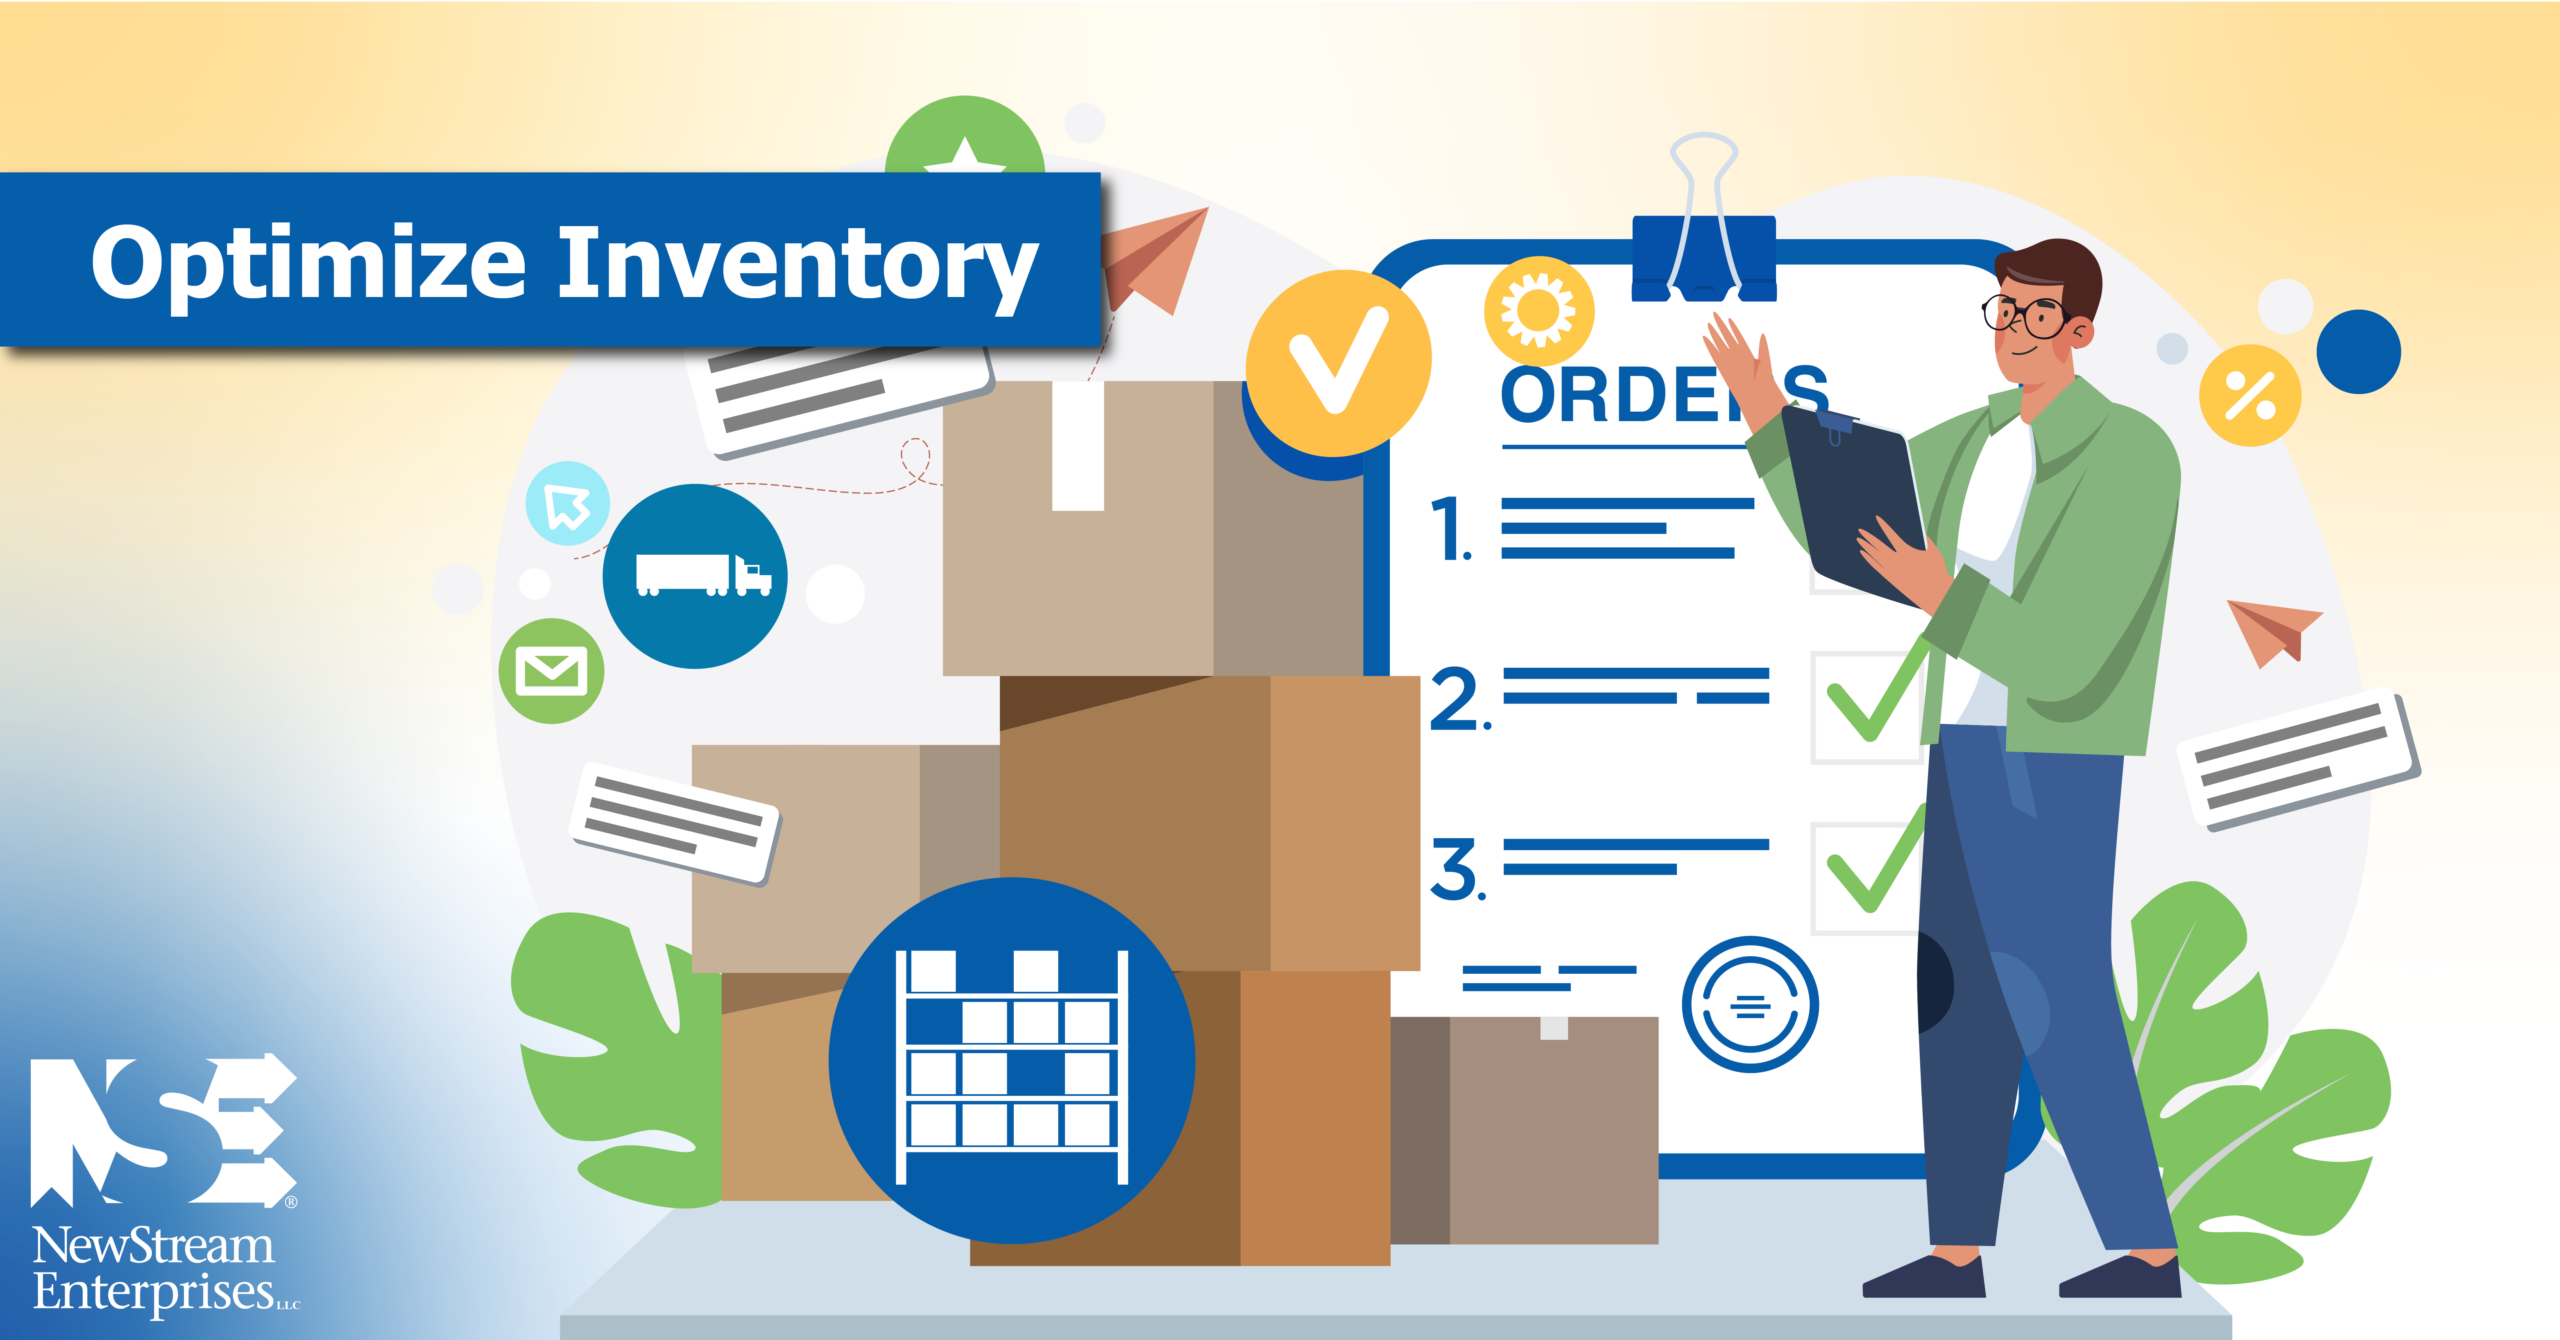 Optimize Inventory